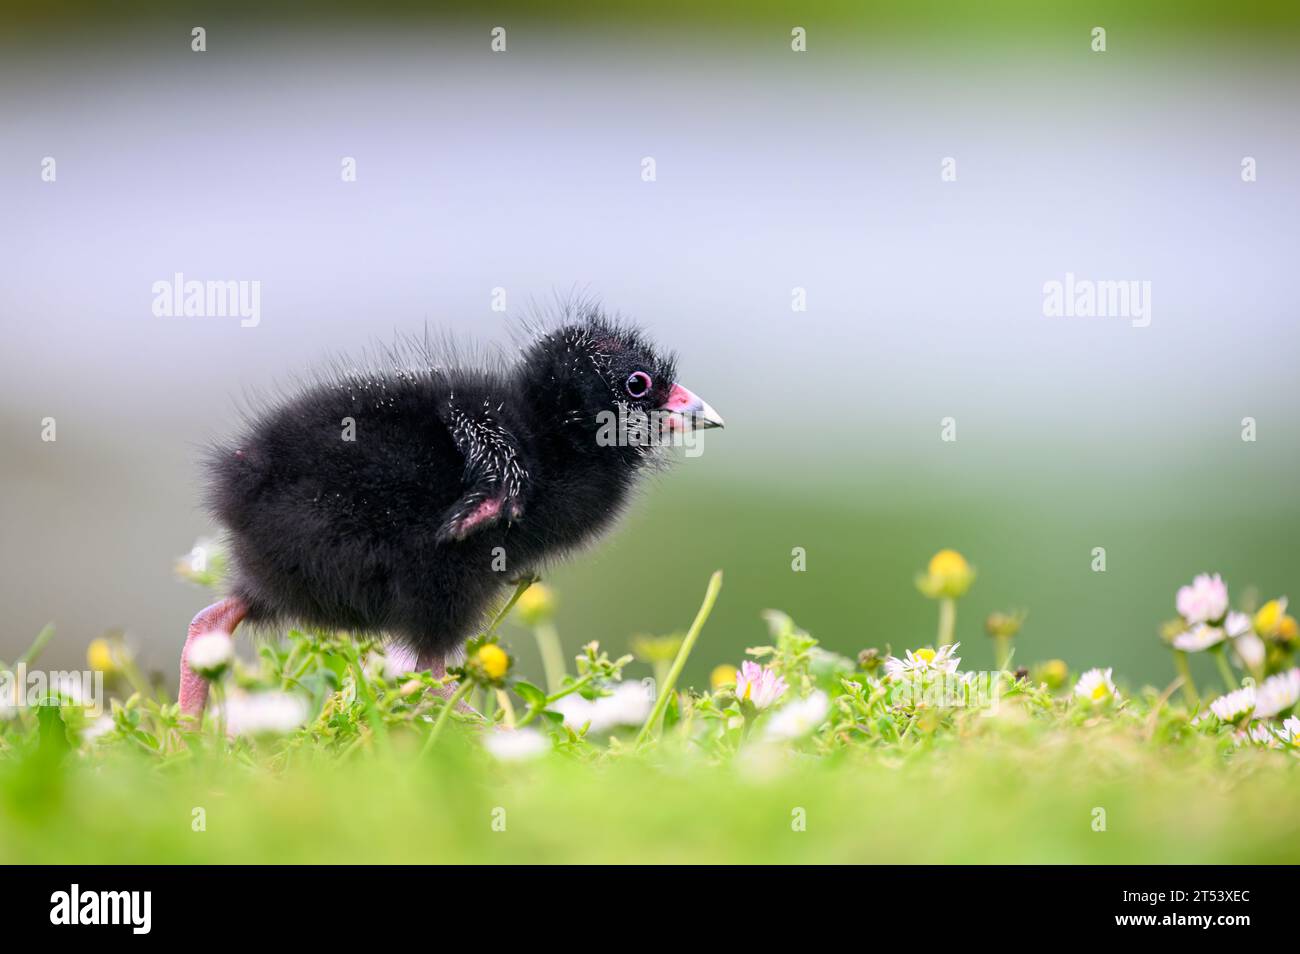 Pukeko chick flapping wings and walking among wildflowers with a smooth nature background. Auckland. Stock Photo